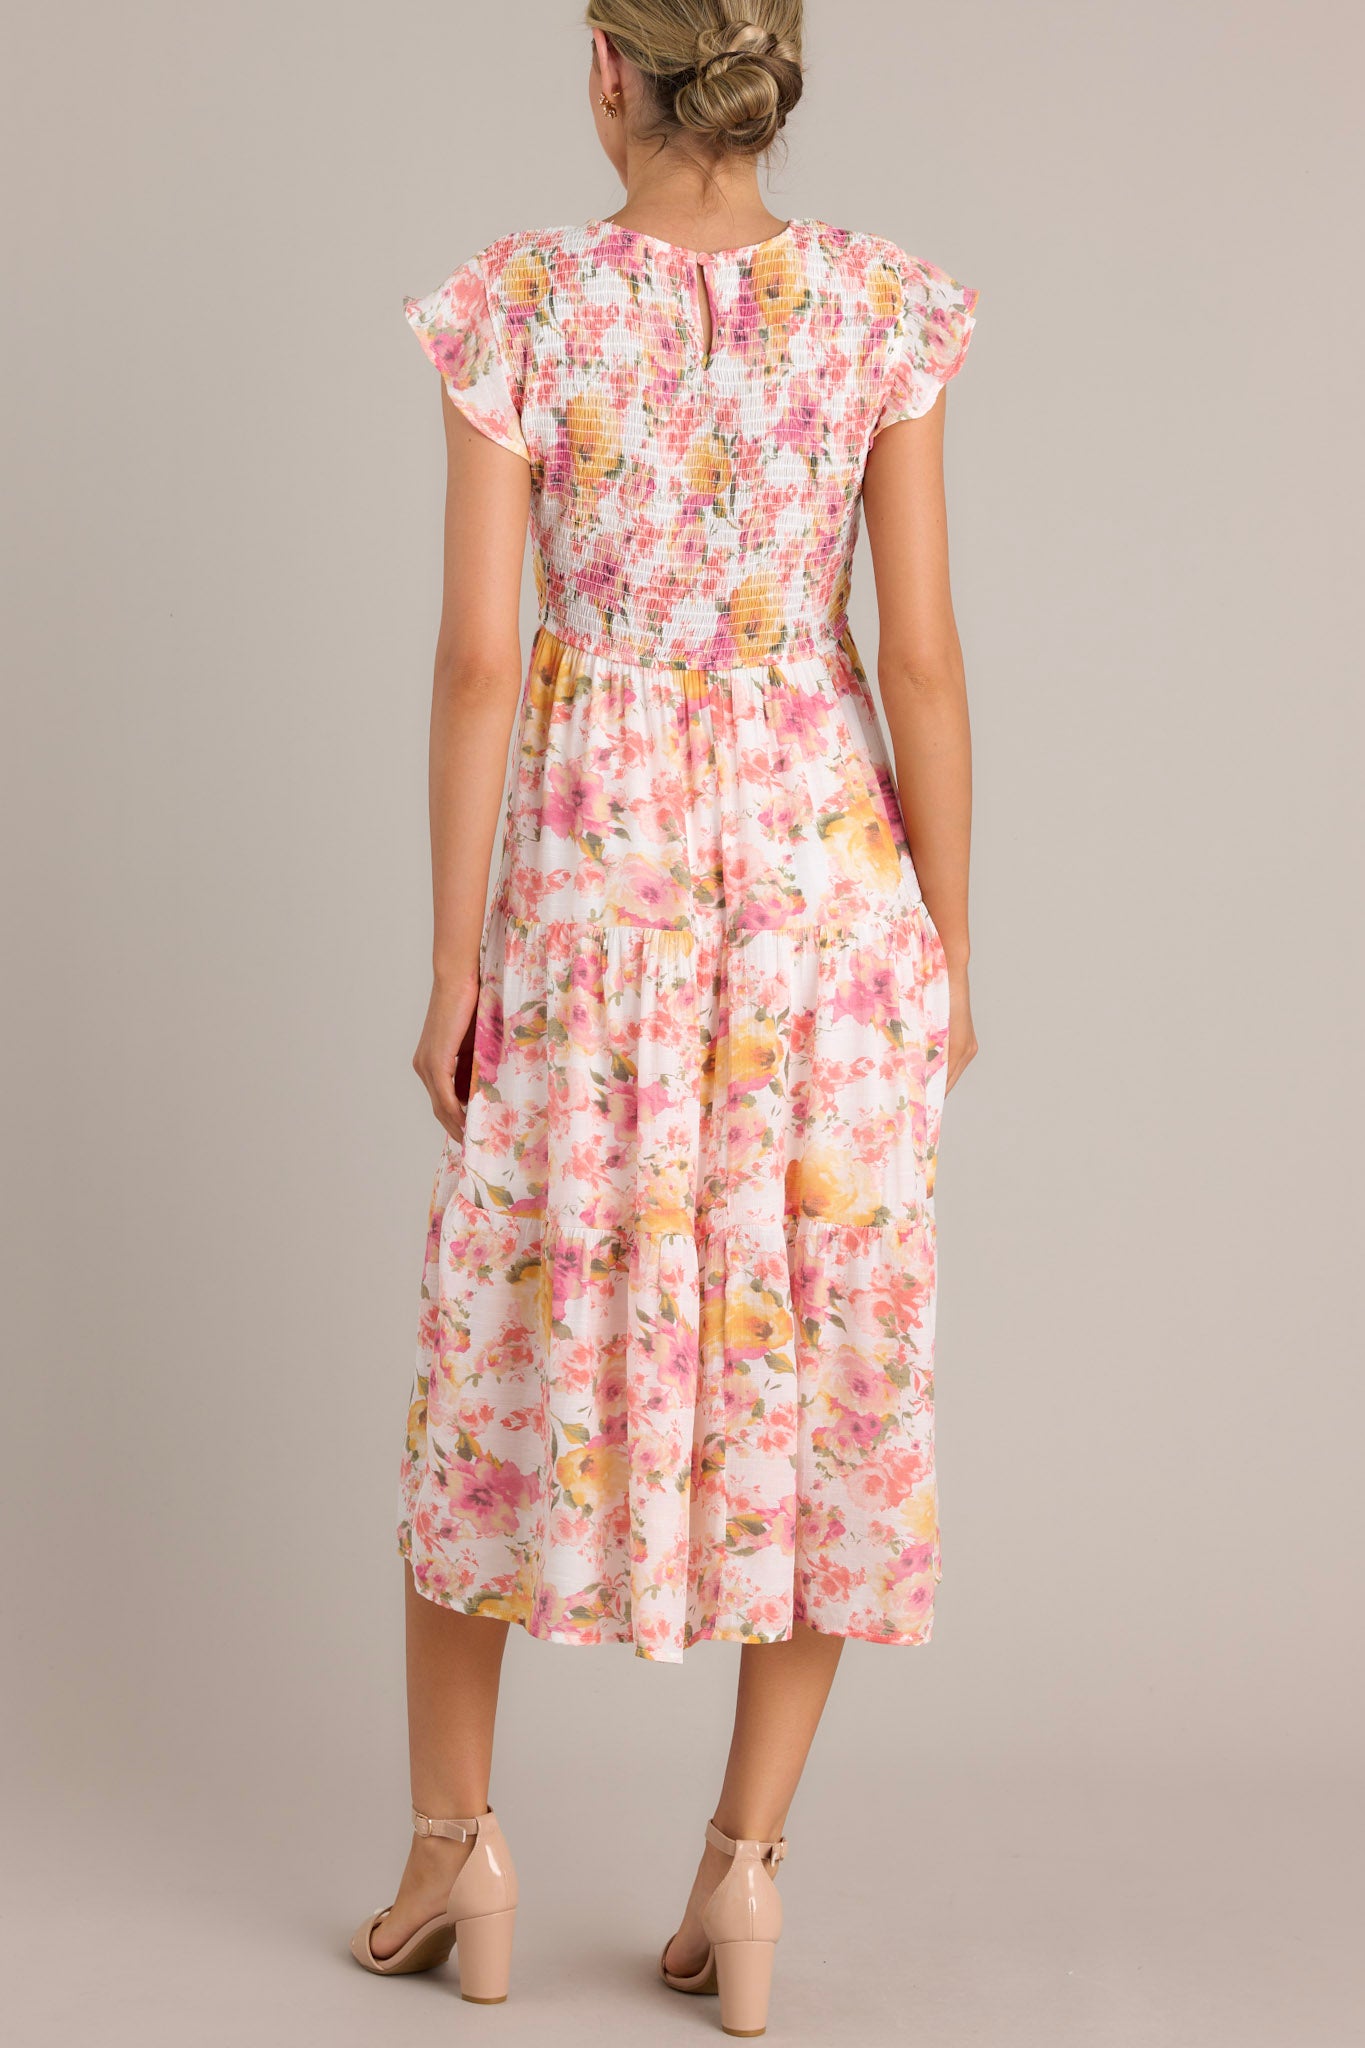 Back view of this pink floral midi dress featuring a high neckline, flutter sleeves, and a tiered design.